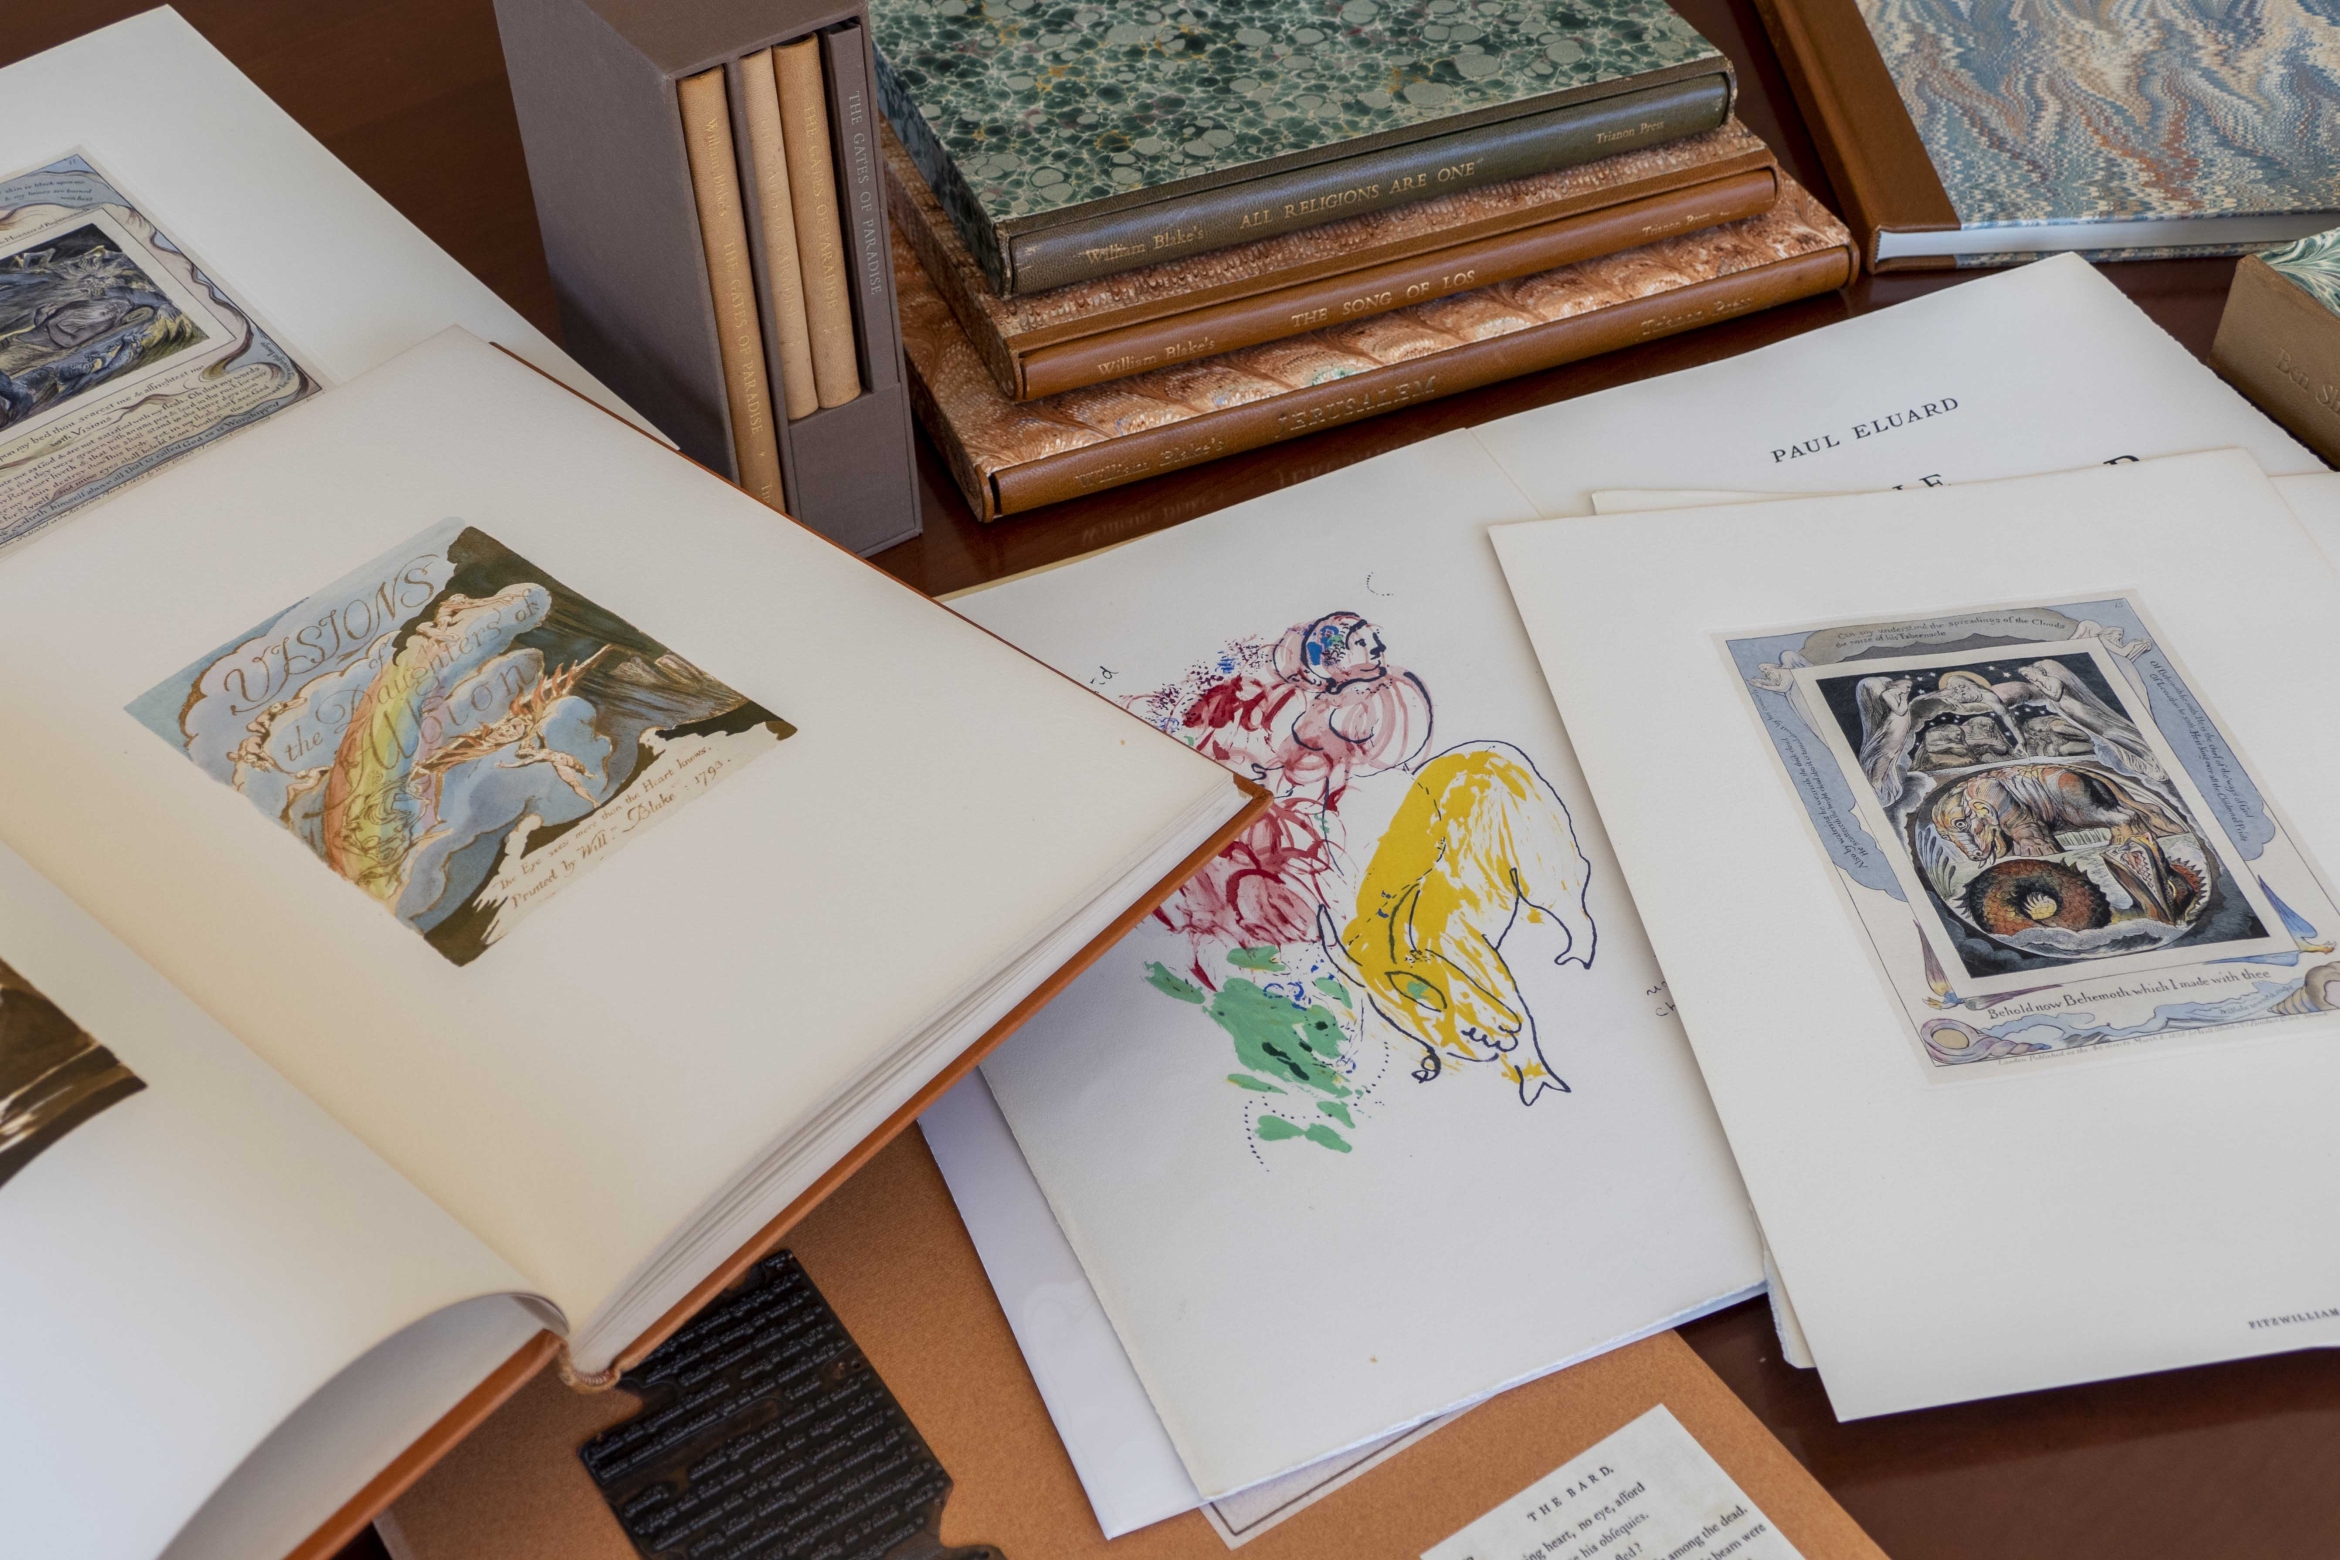 Open books and papers from the Pananides collection at UCSB Library